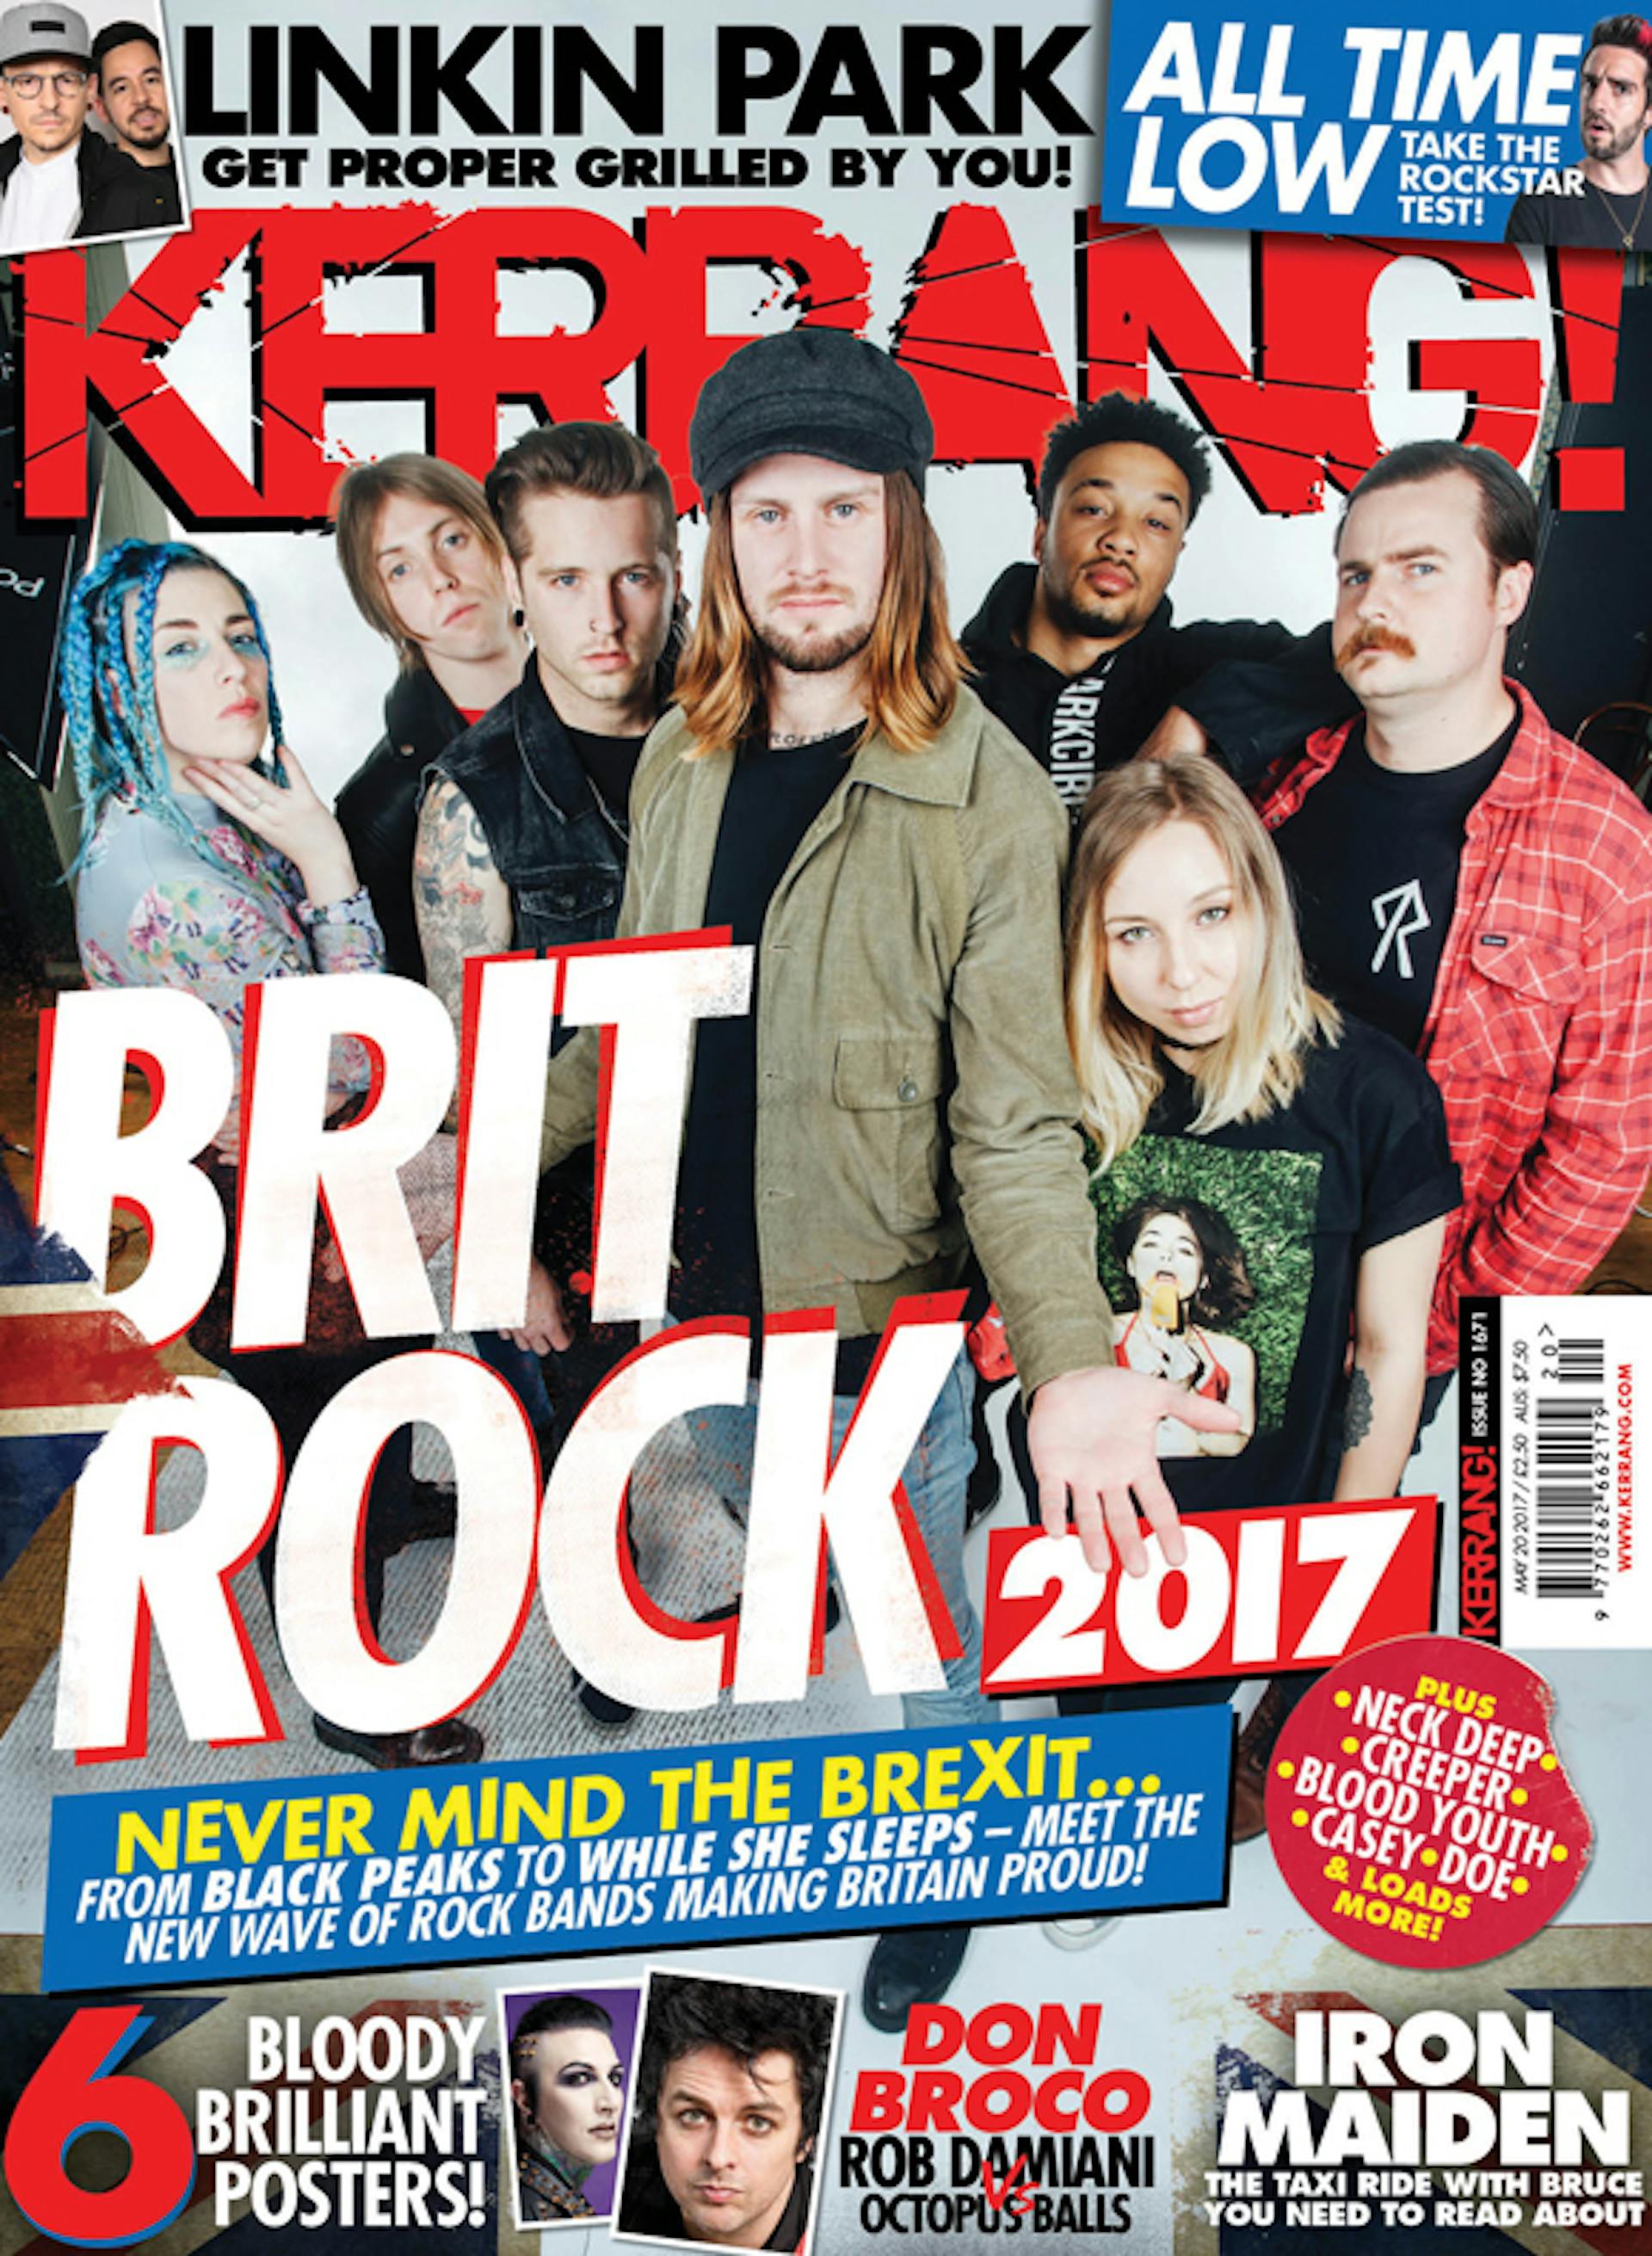 Watch The New While She Sleeps Video Kerrang